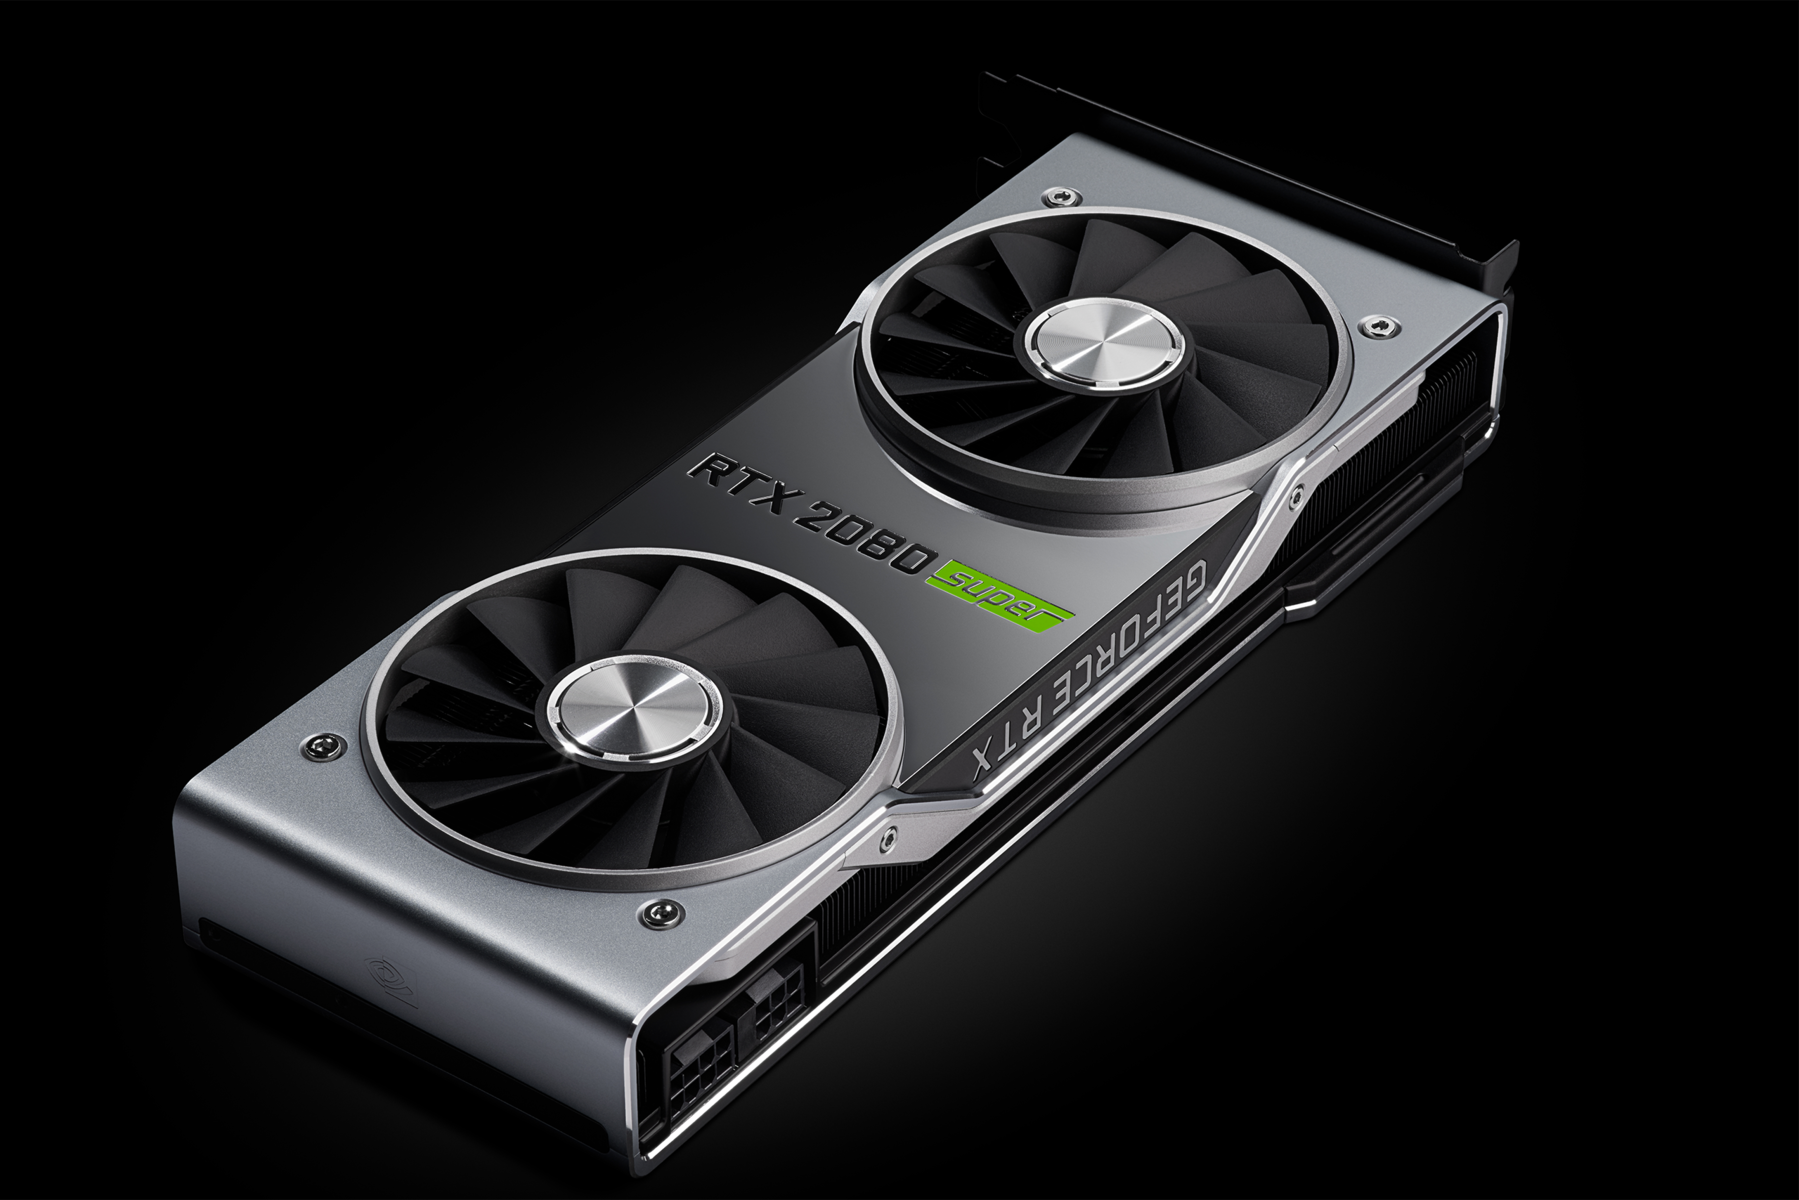 Release of an Nvidia GeForce RTX 2080 